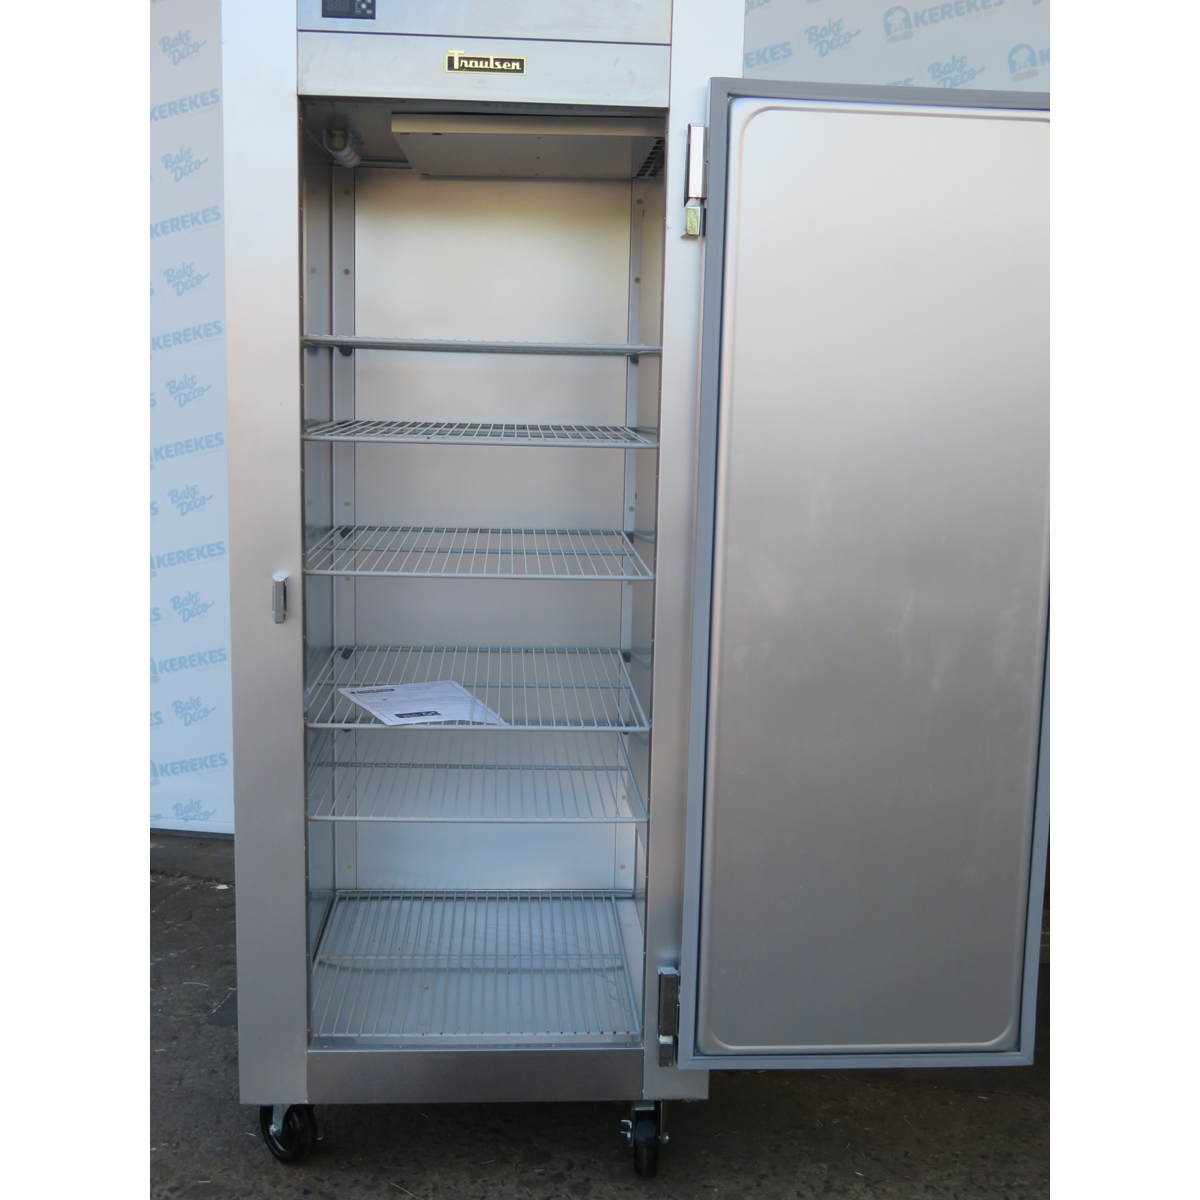 Traulsen G12010 Single Freezer, Used Excellent Condition image 1